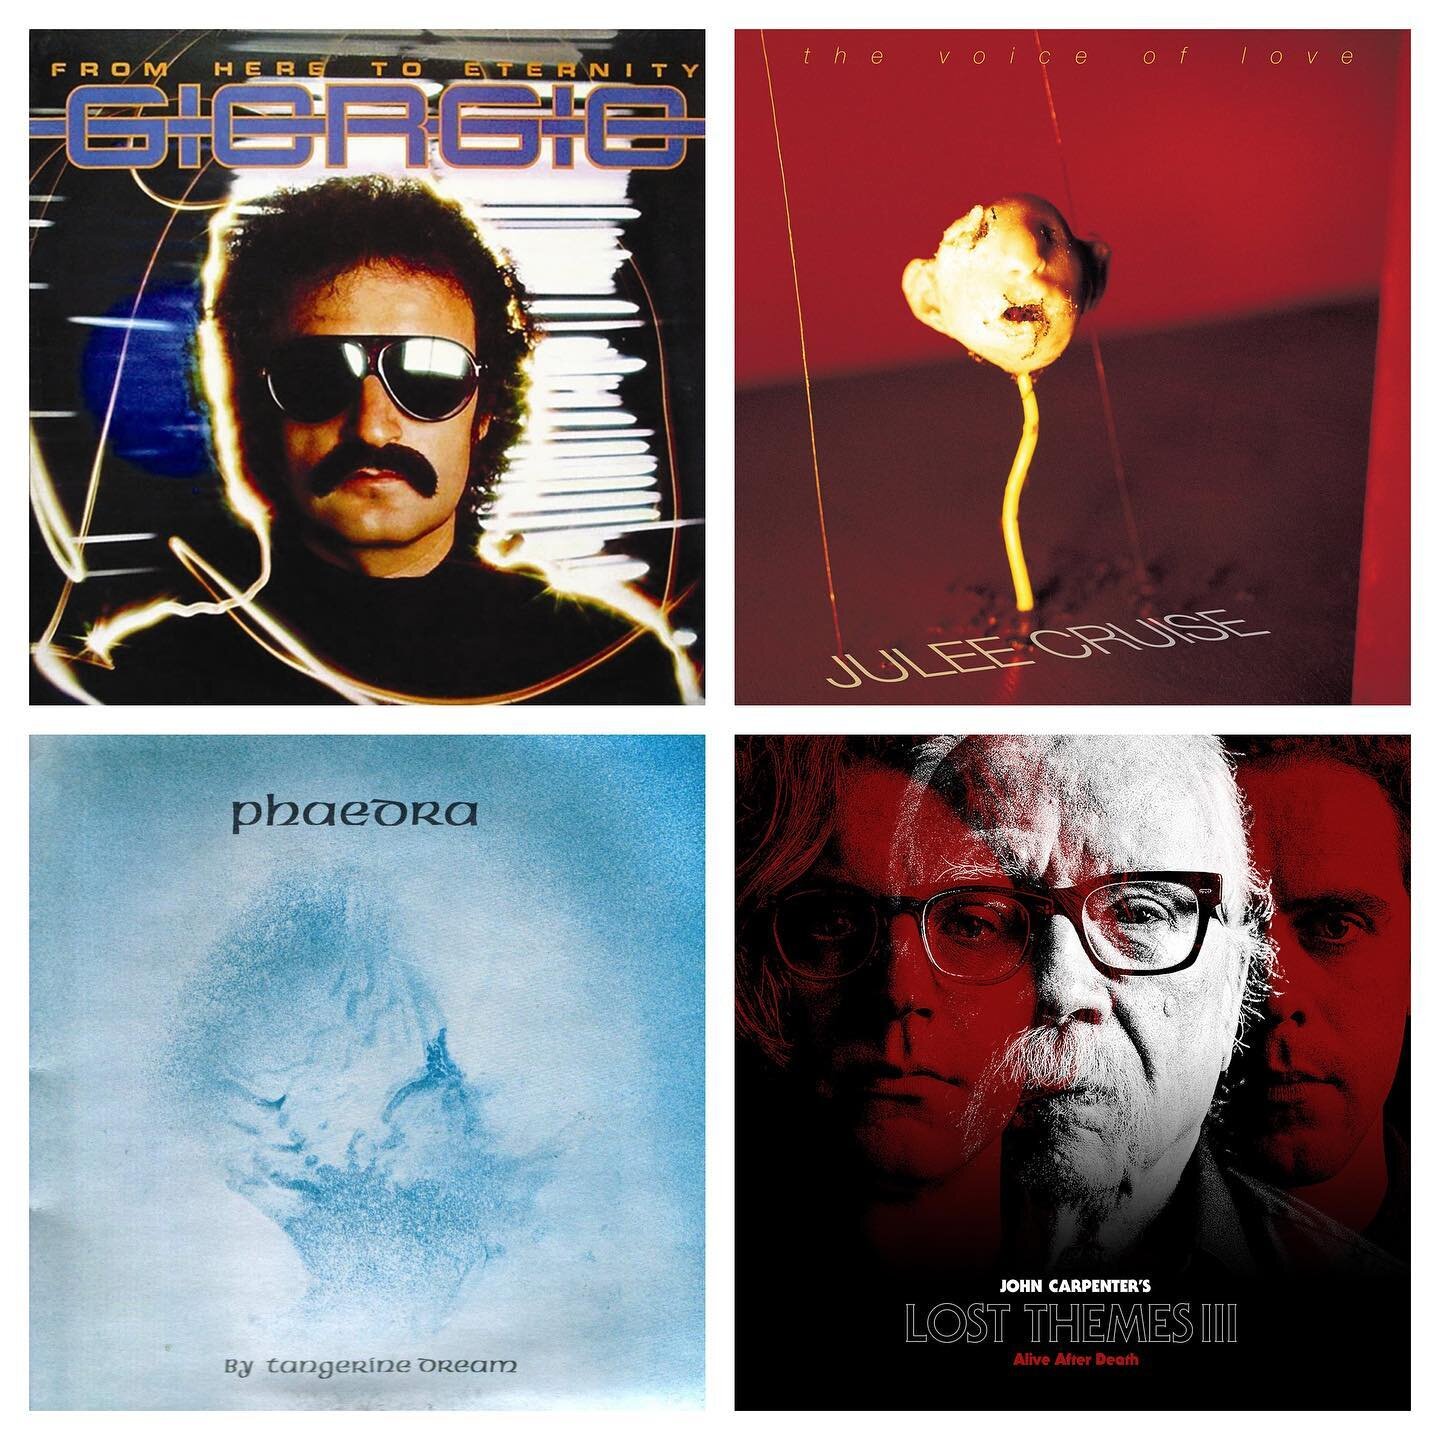 WAX ON WAX: FILM ADJACENT 

Now live! Hit the link in bio, and head over to the blog page to read!

This week I&rsquo;m featuring albums by Giorgio Moroder, Julee Cruise/David Lynch, Tangerine Dream, and John Carpenter. This has been one of my favori